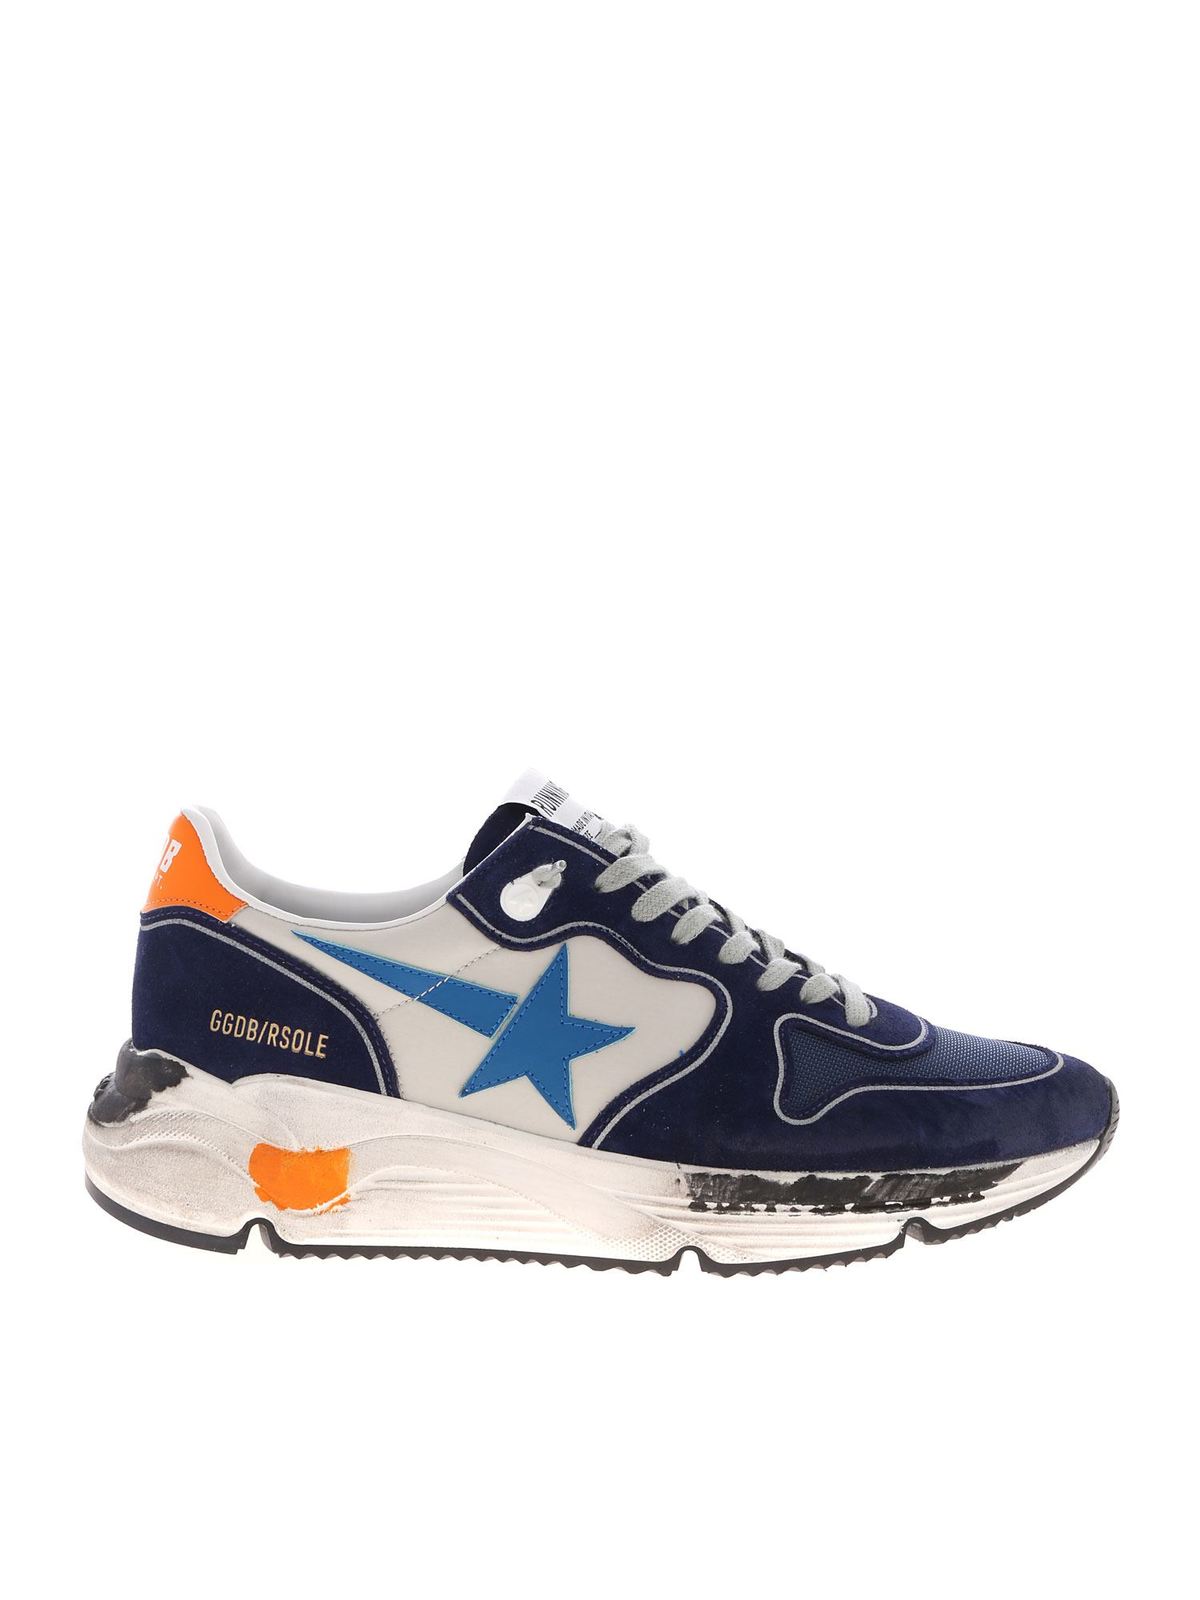 Trainers Golden Goose - Running Sole sneakers in blue and grey - G36MS963P1